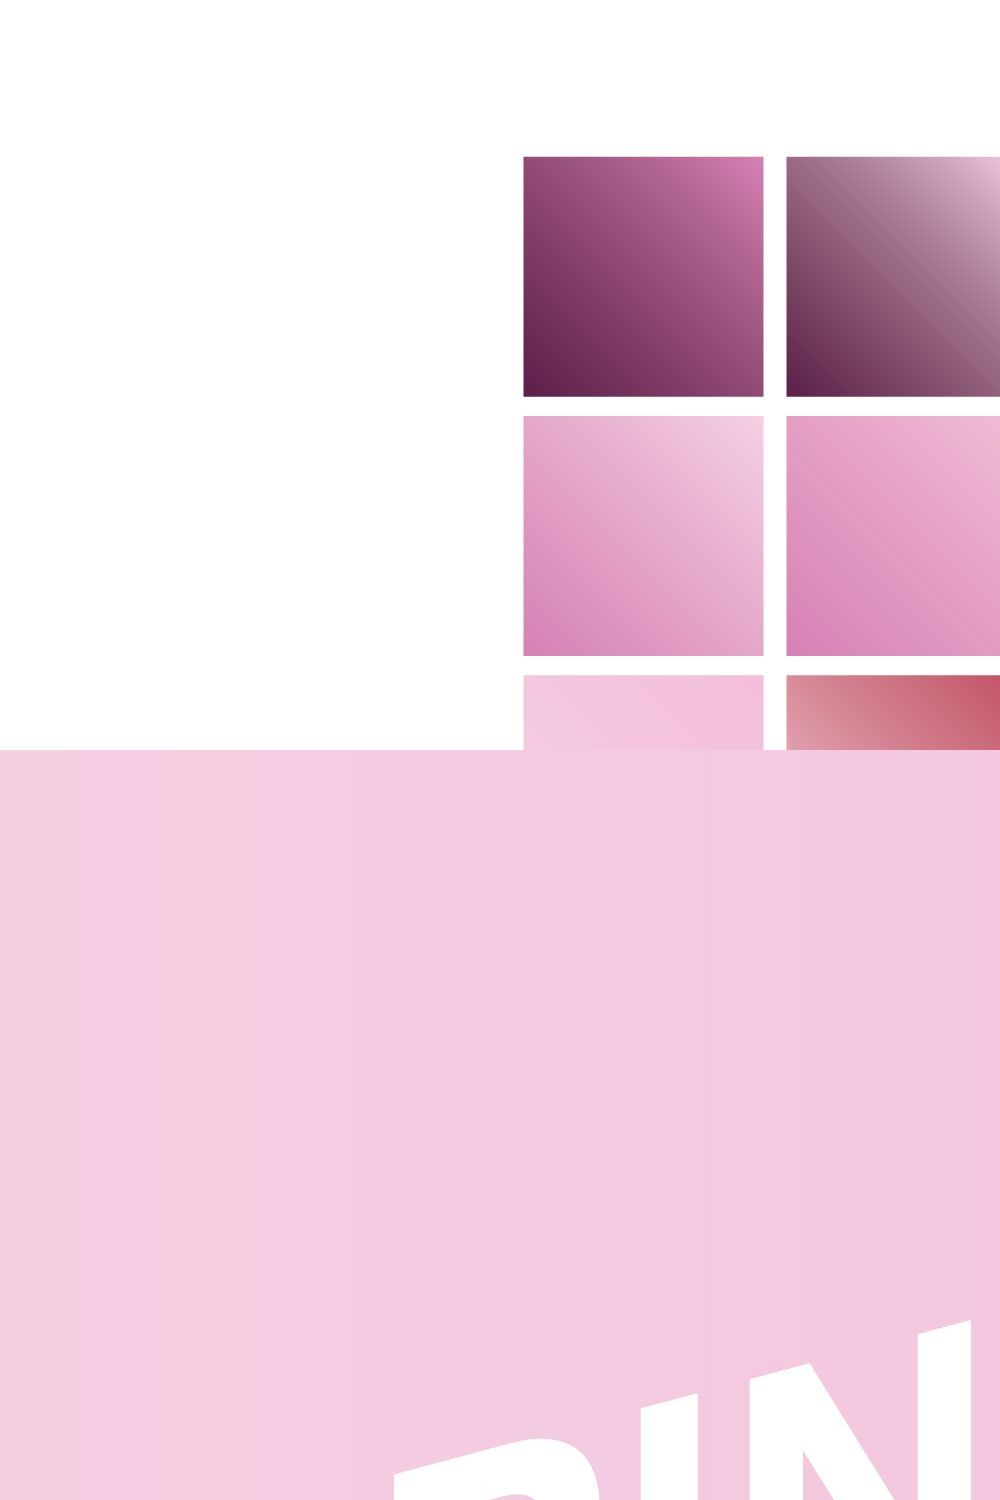 Pinkish Gradients pinterest preview image.